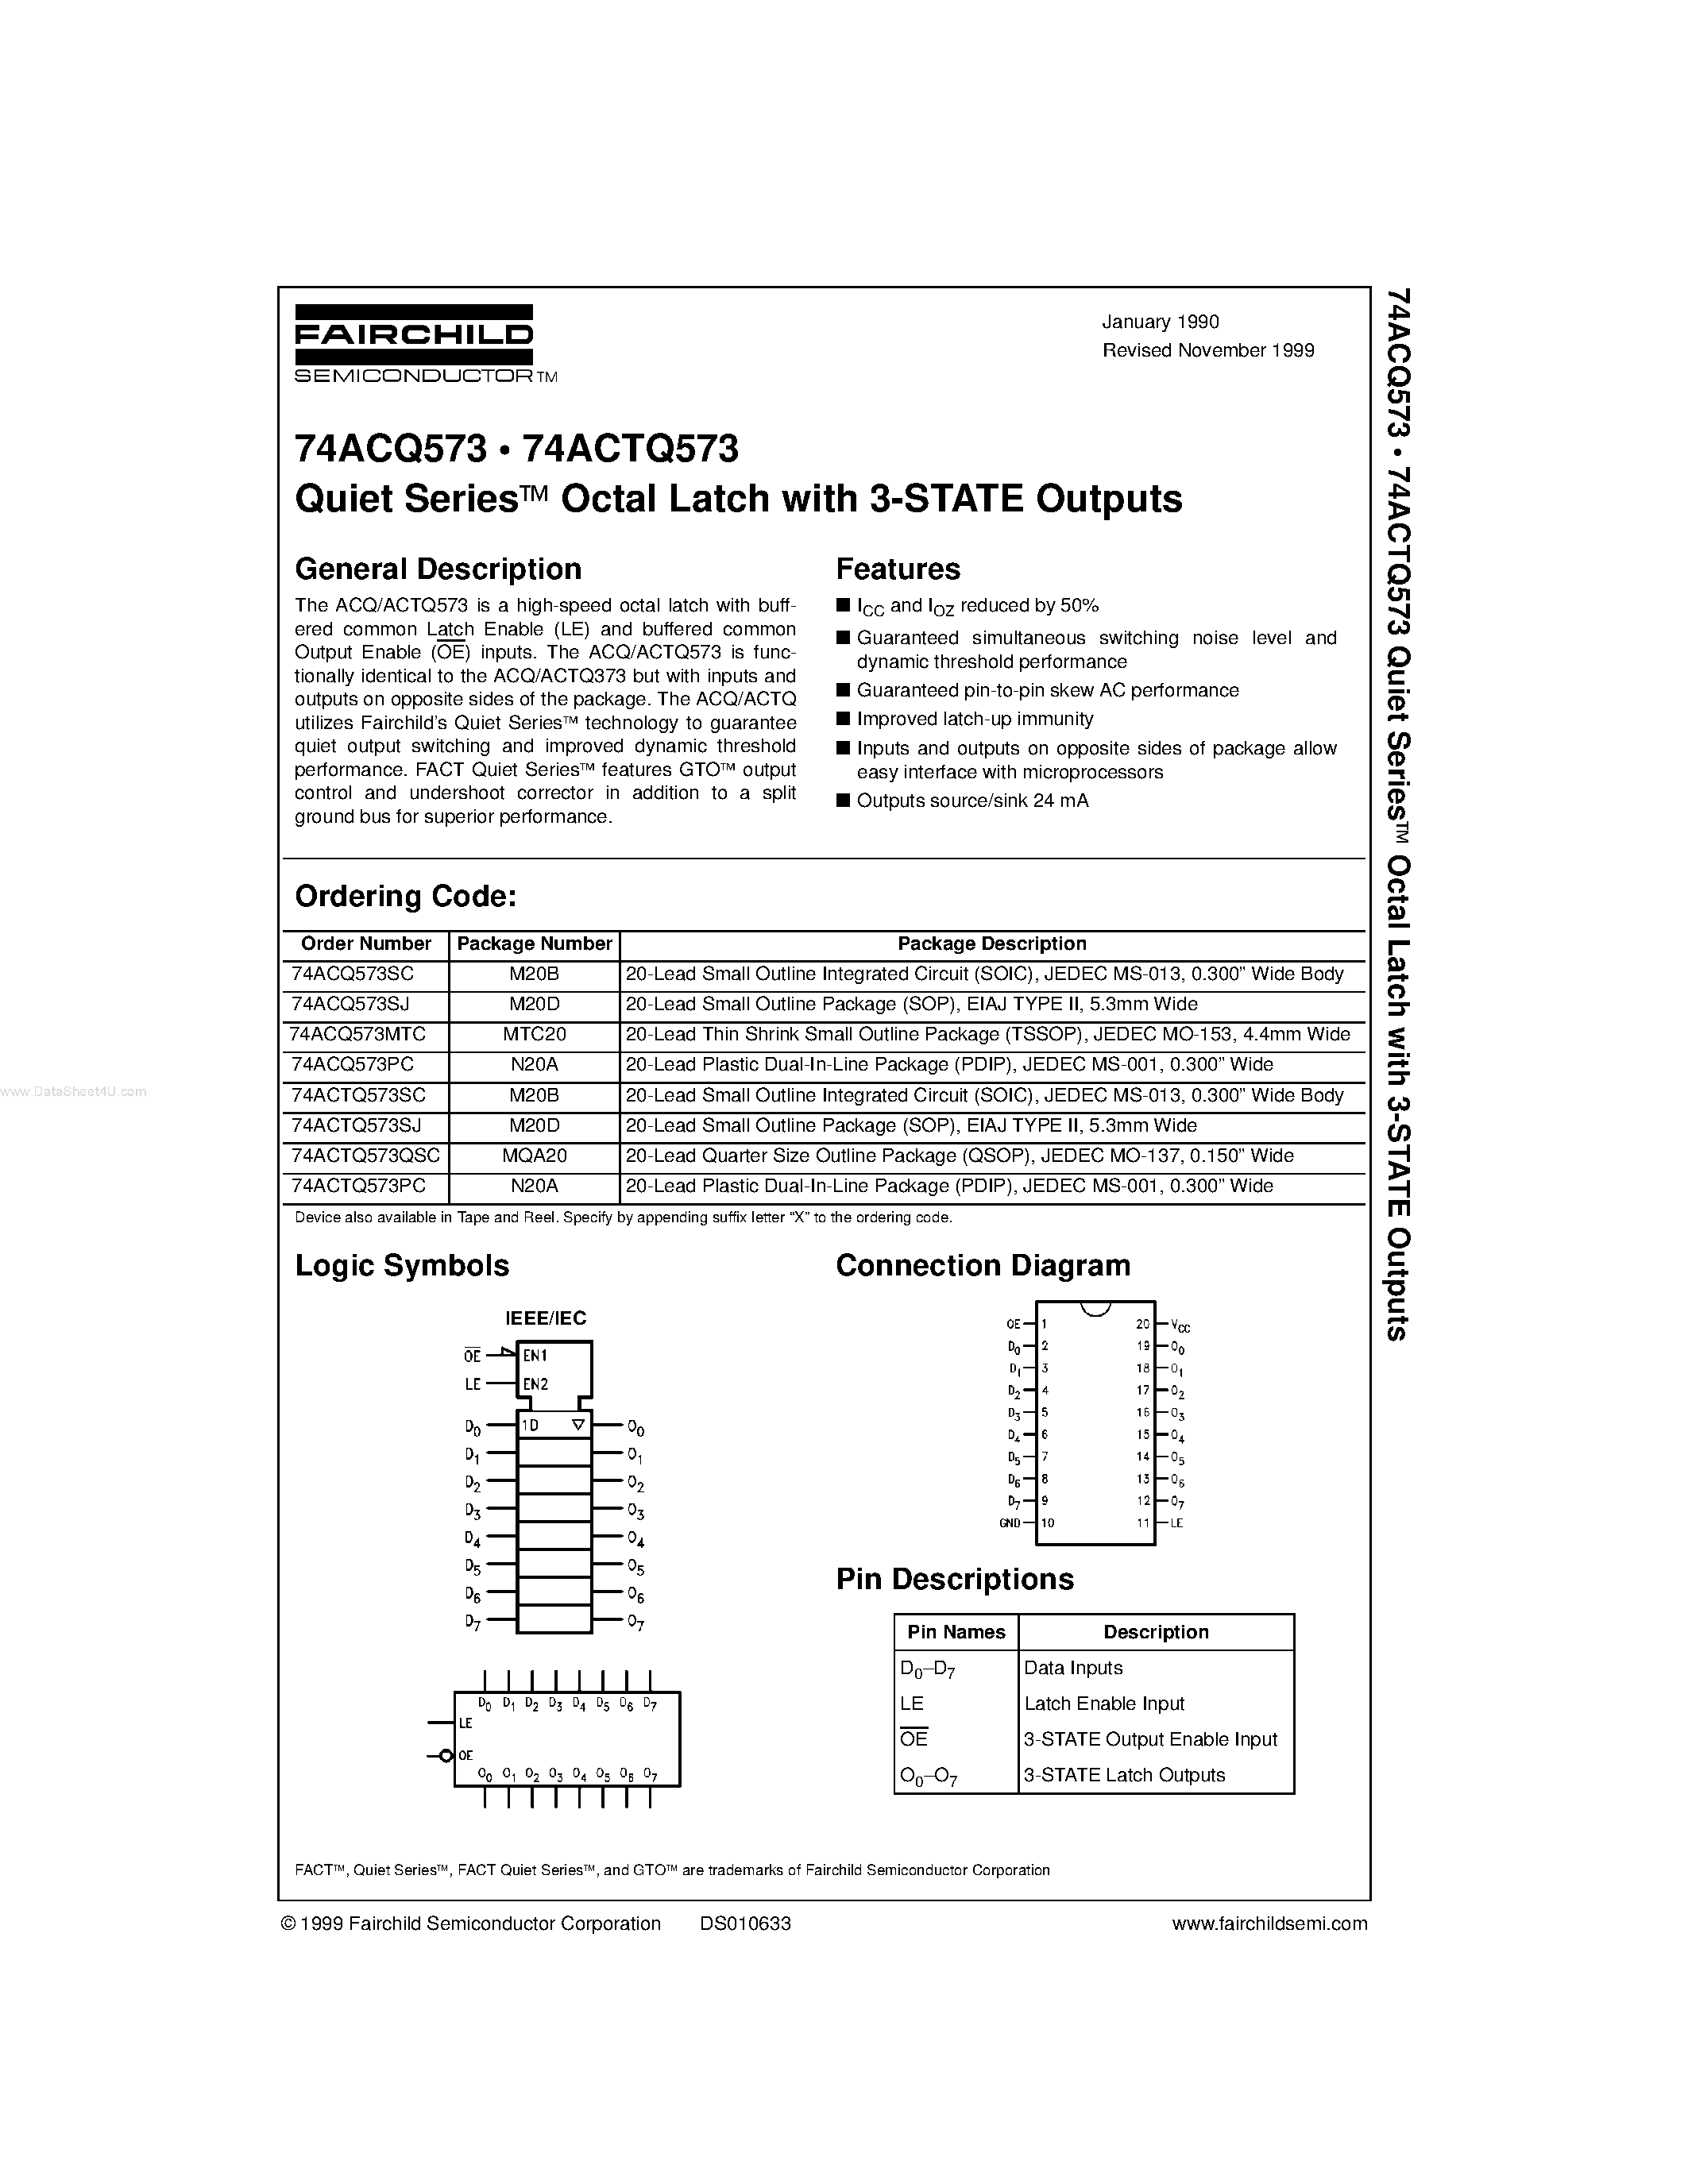 Datasheet 74ACQ573 - Quiet Series Octal Latch with 3-STATE Outputs page 1